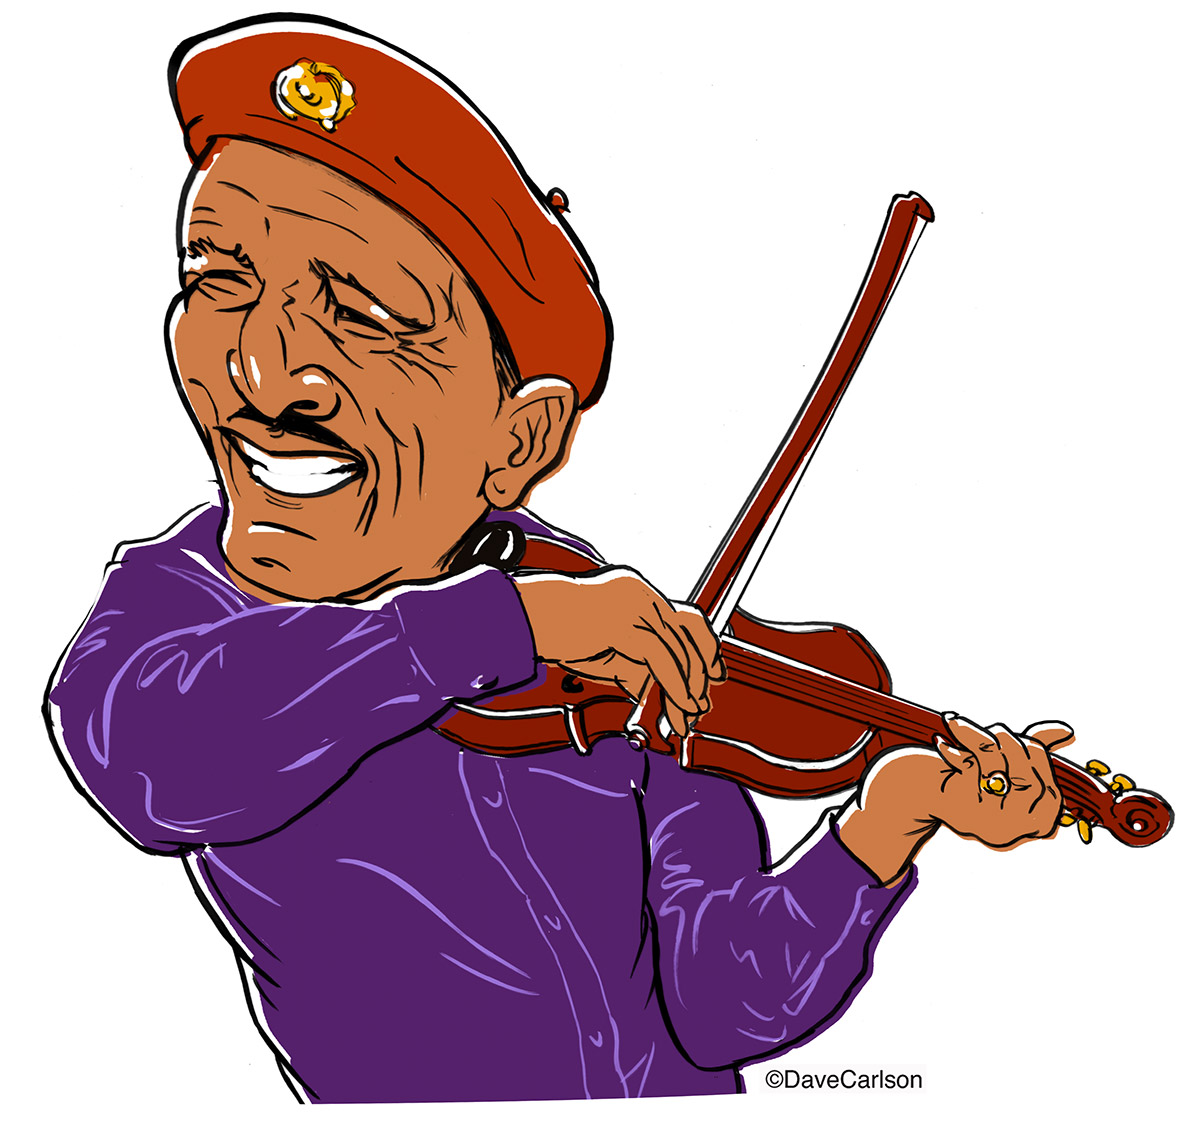 Caricature of Howard "Louie Bluie" Armstrong, mid-20th century blues singer, musician, writer, folk artist and raconteur.